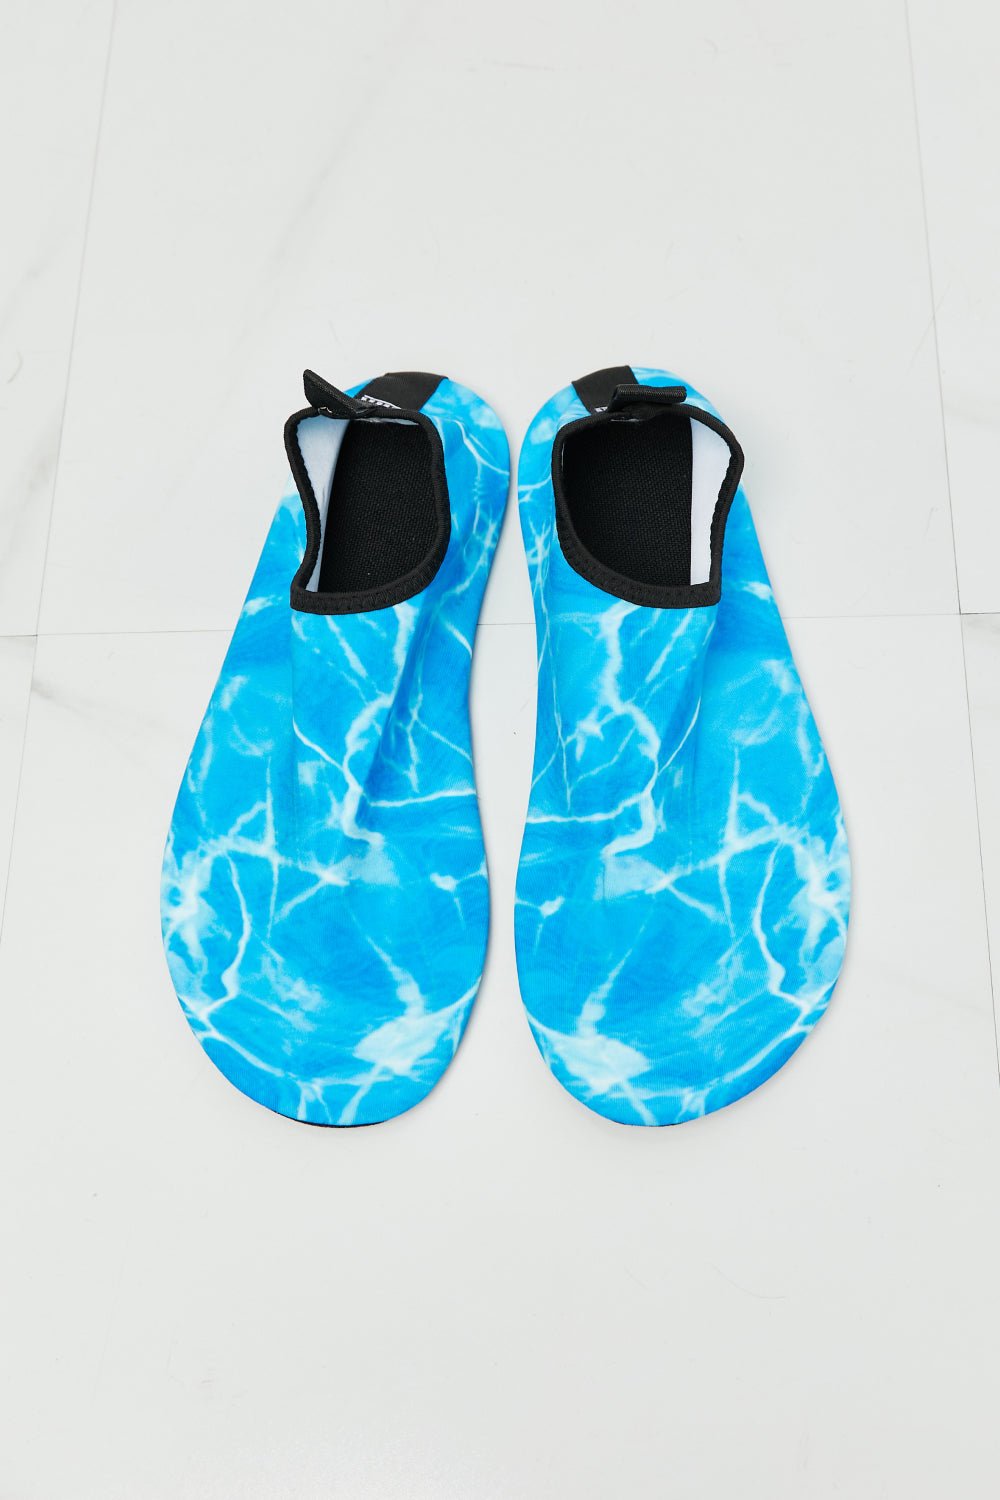 MMshoes On The Shore Water Shoes in Sky Blue - Guy Christopher